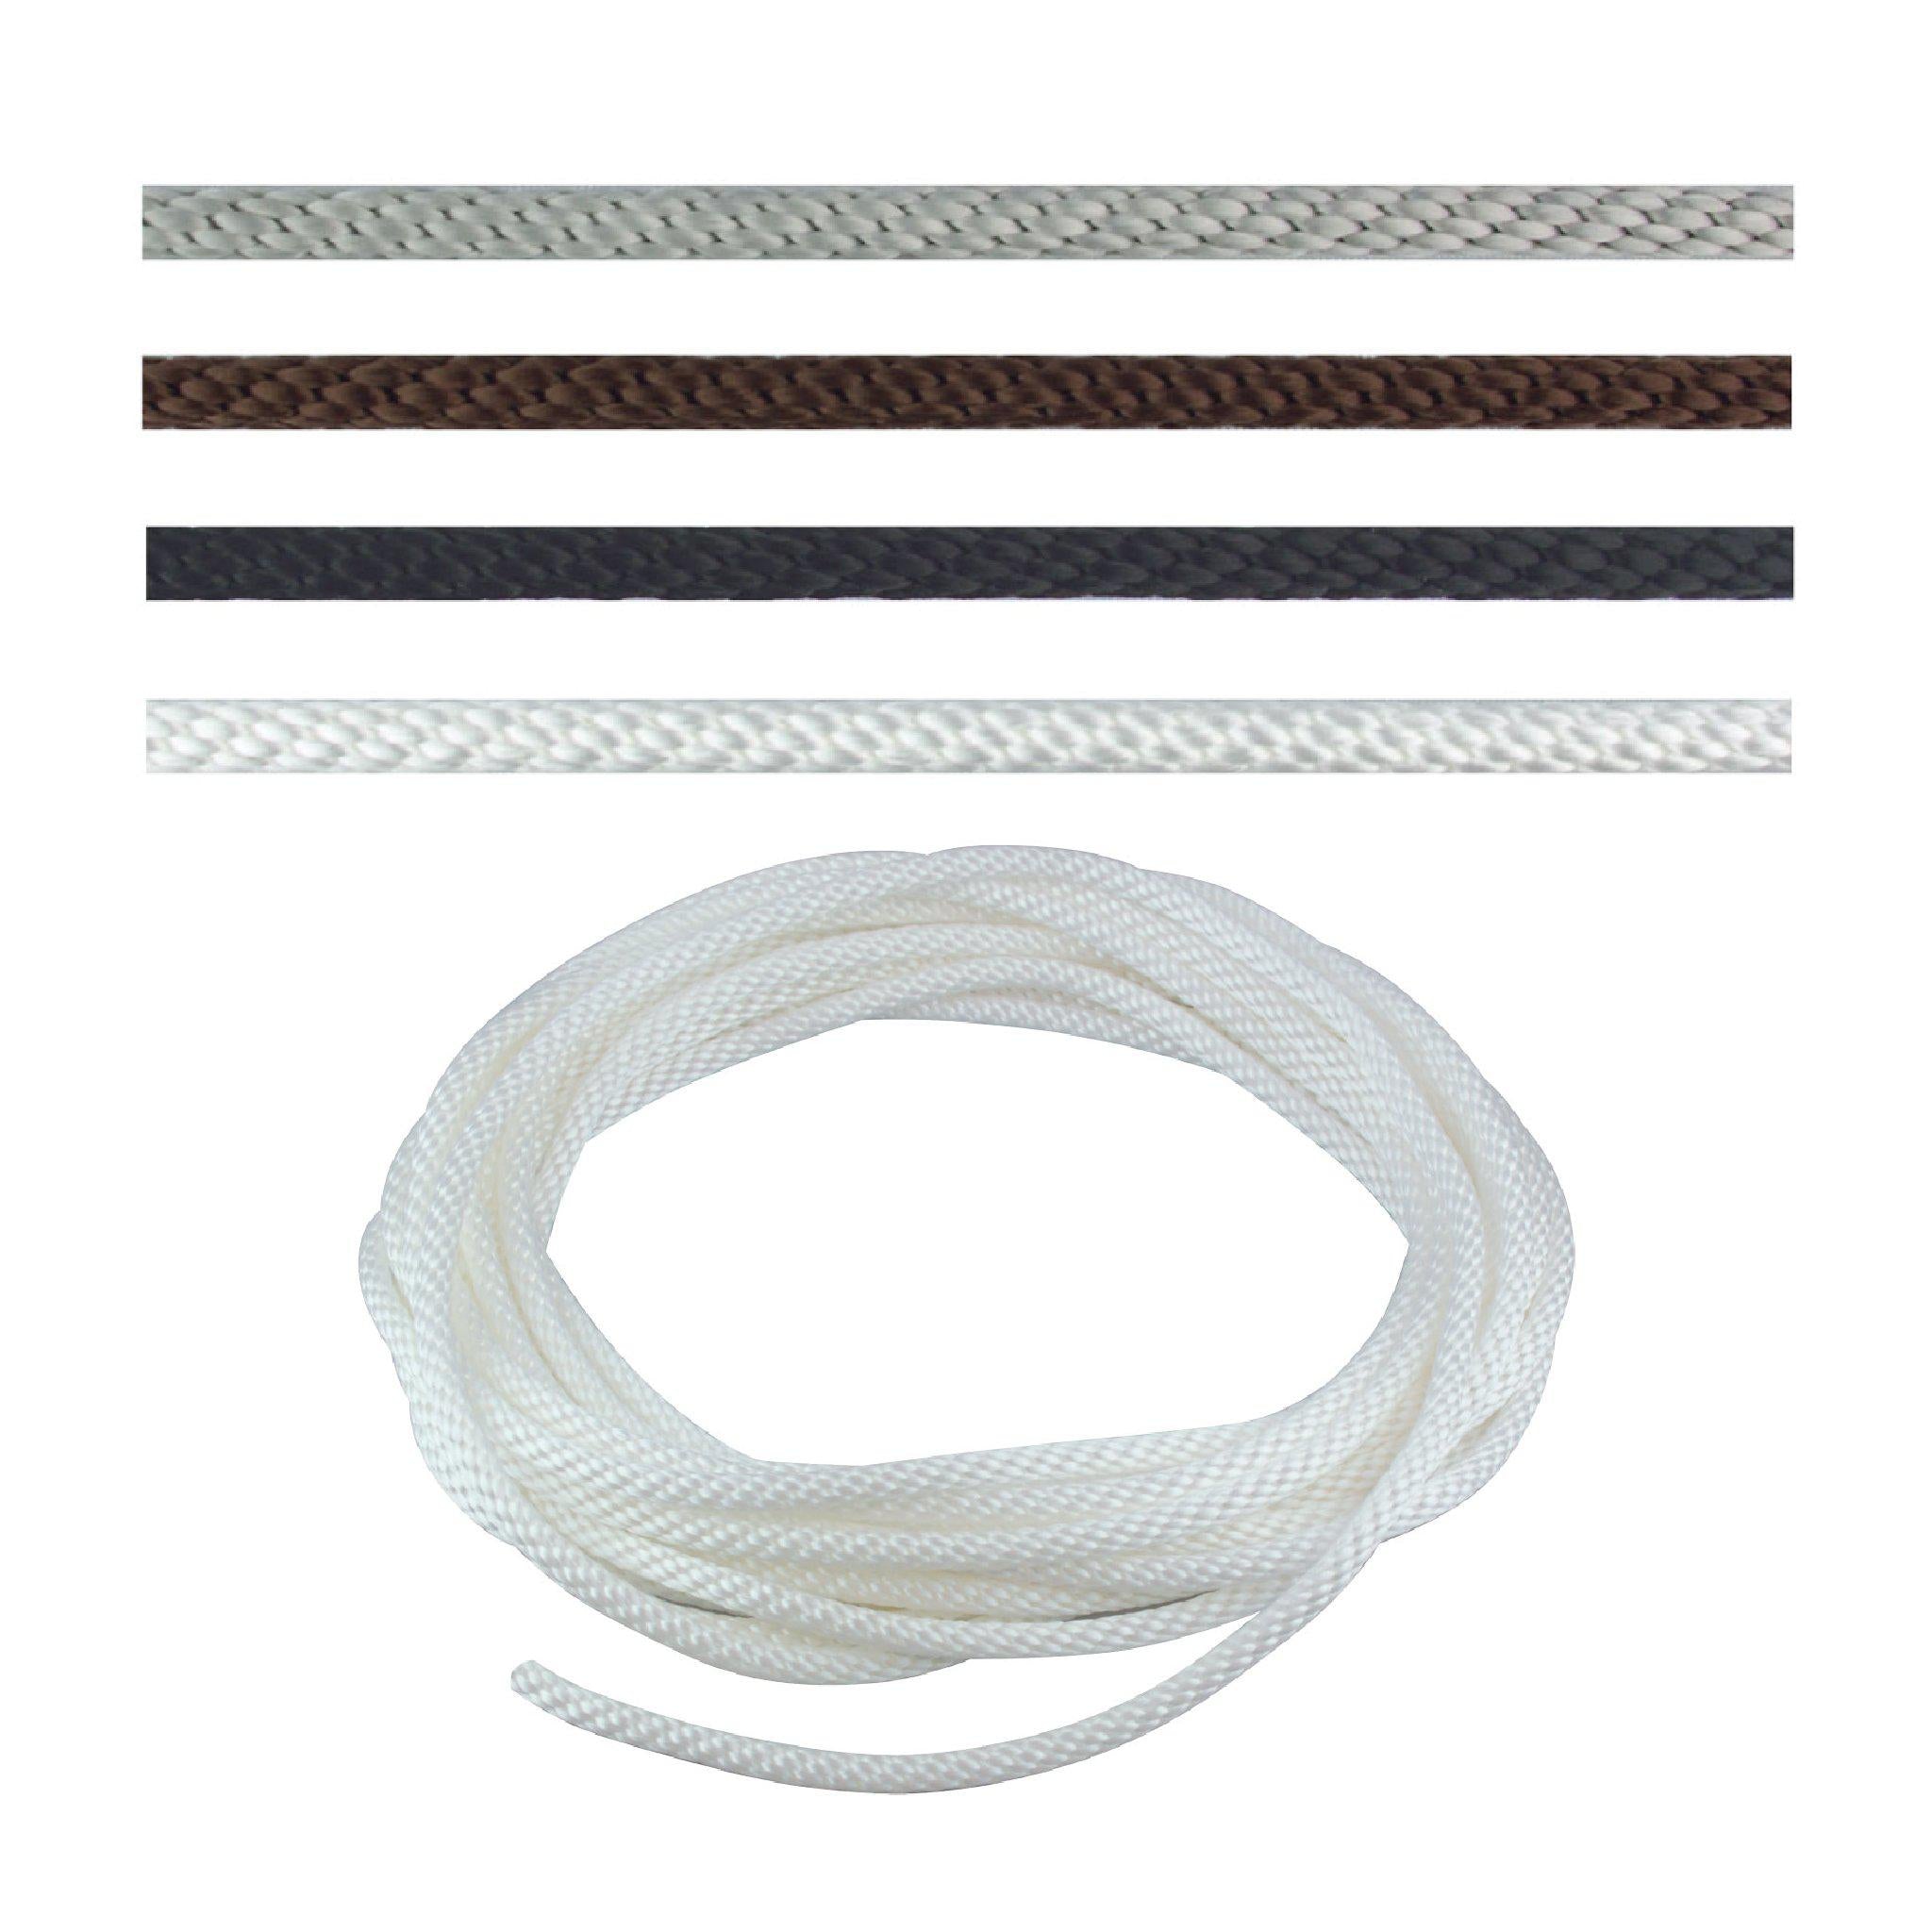 Replacement Flagpole Rope | Polypropylene Halyard | Fly Me Flag